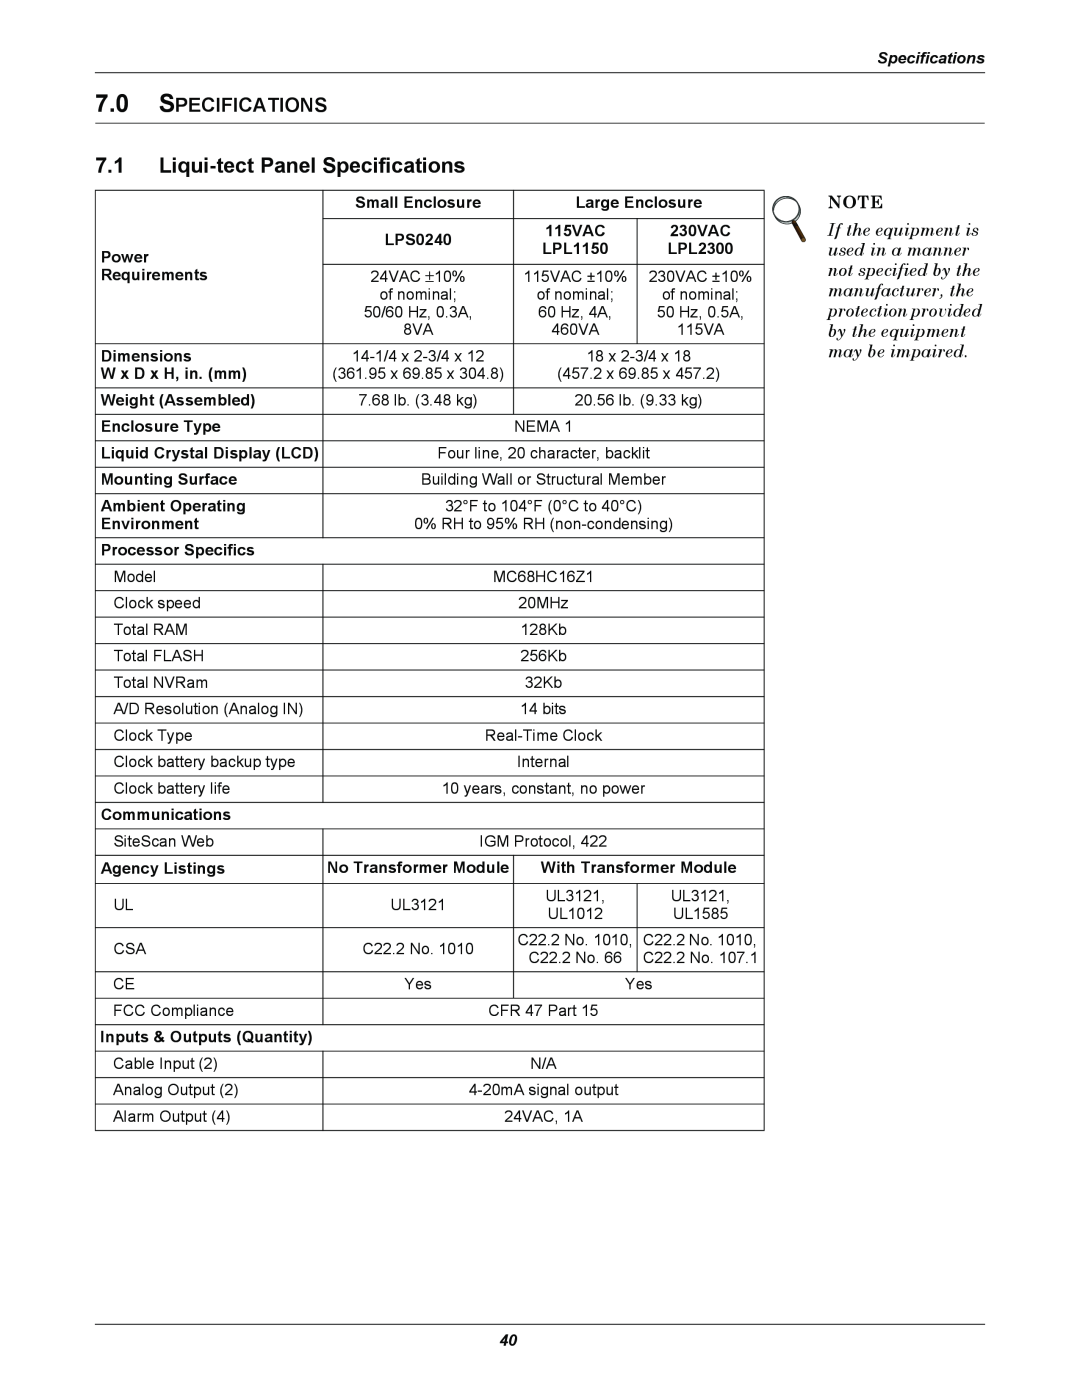 Emerson MC68HC16Z1 user manual 7.1Liqui-tectPanel Specifications, 7.0SPECIFICATIONS 